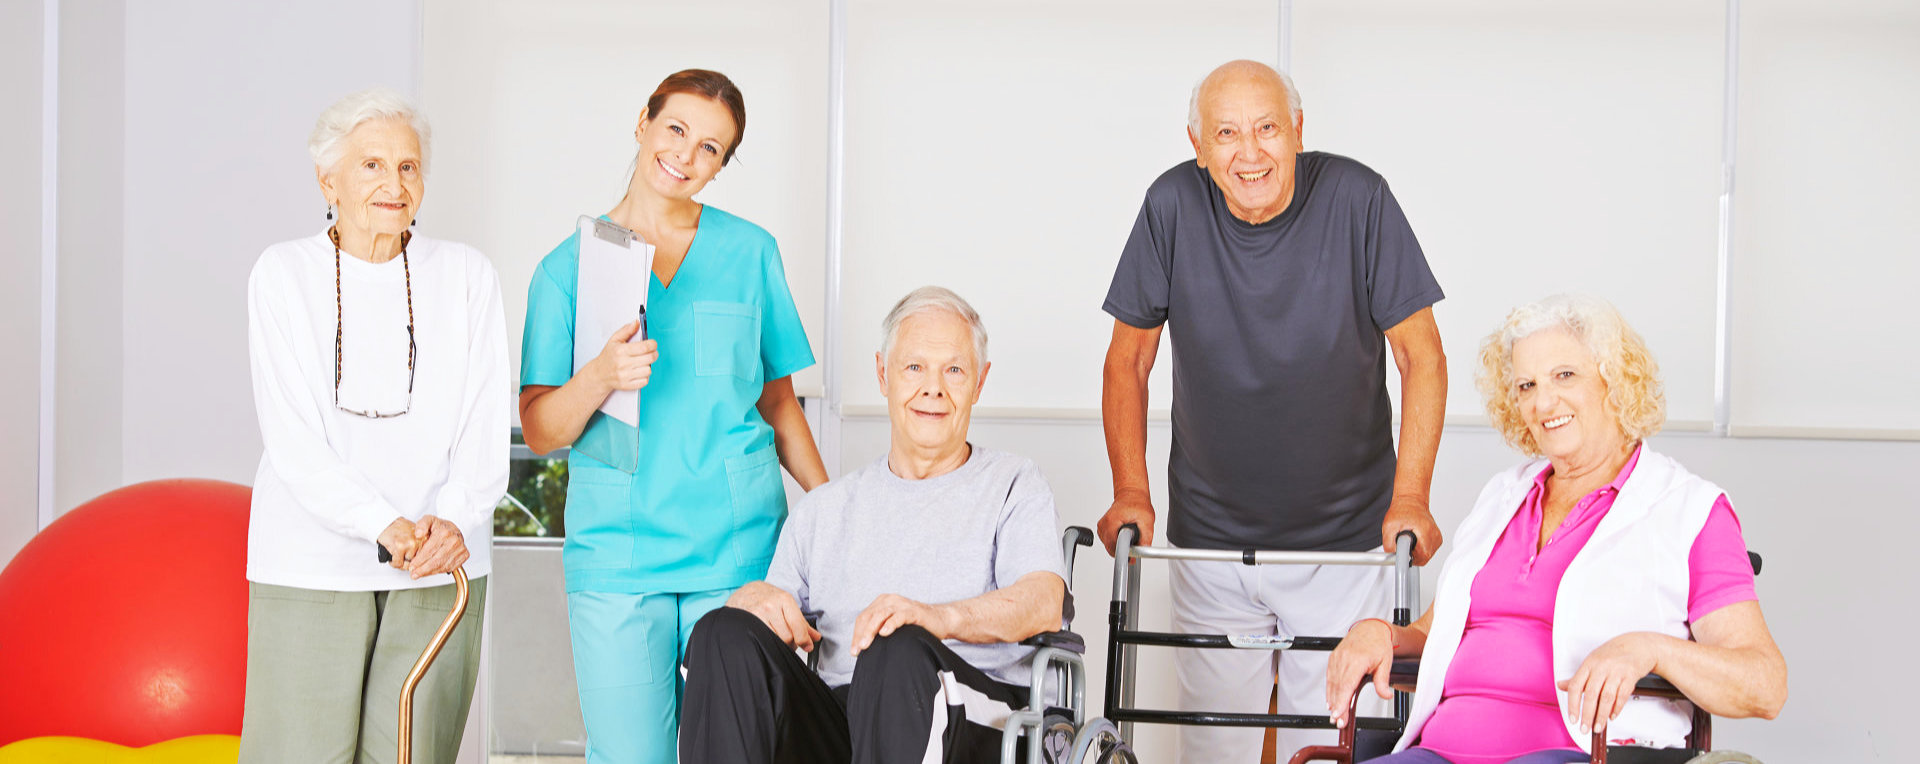 Group of elderly people and one medical staff